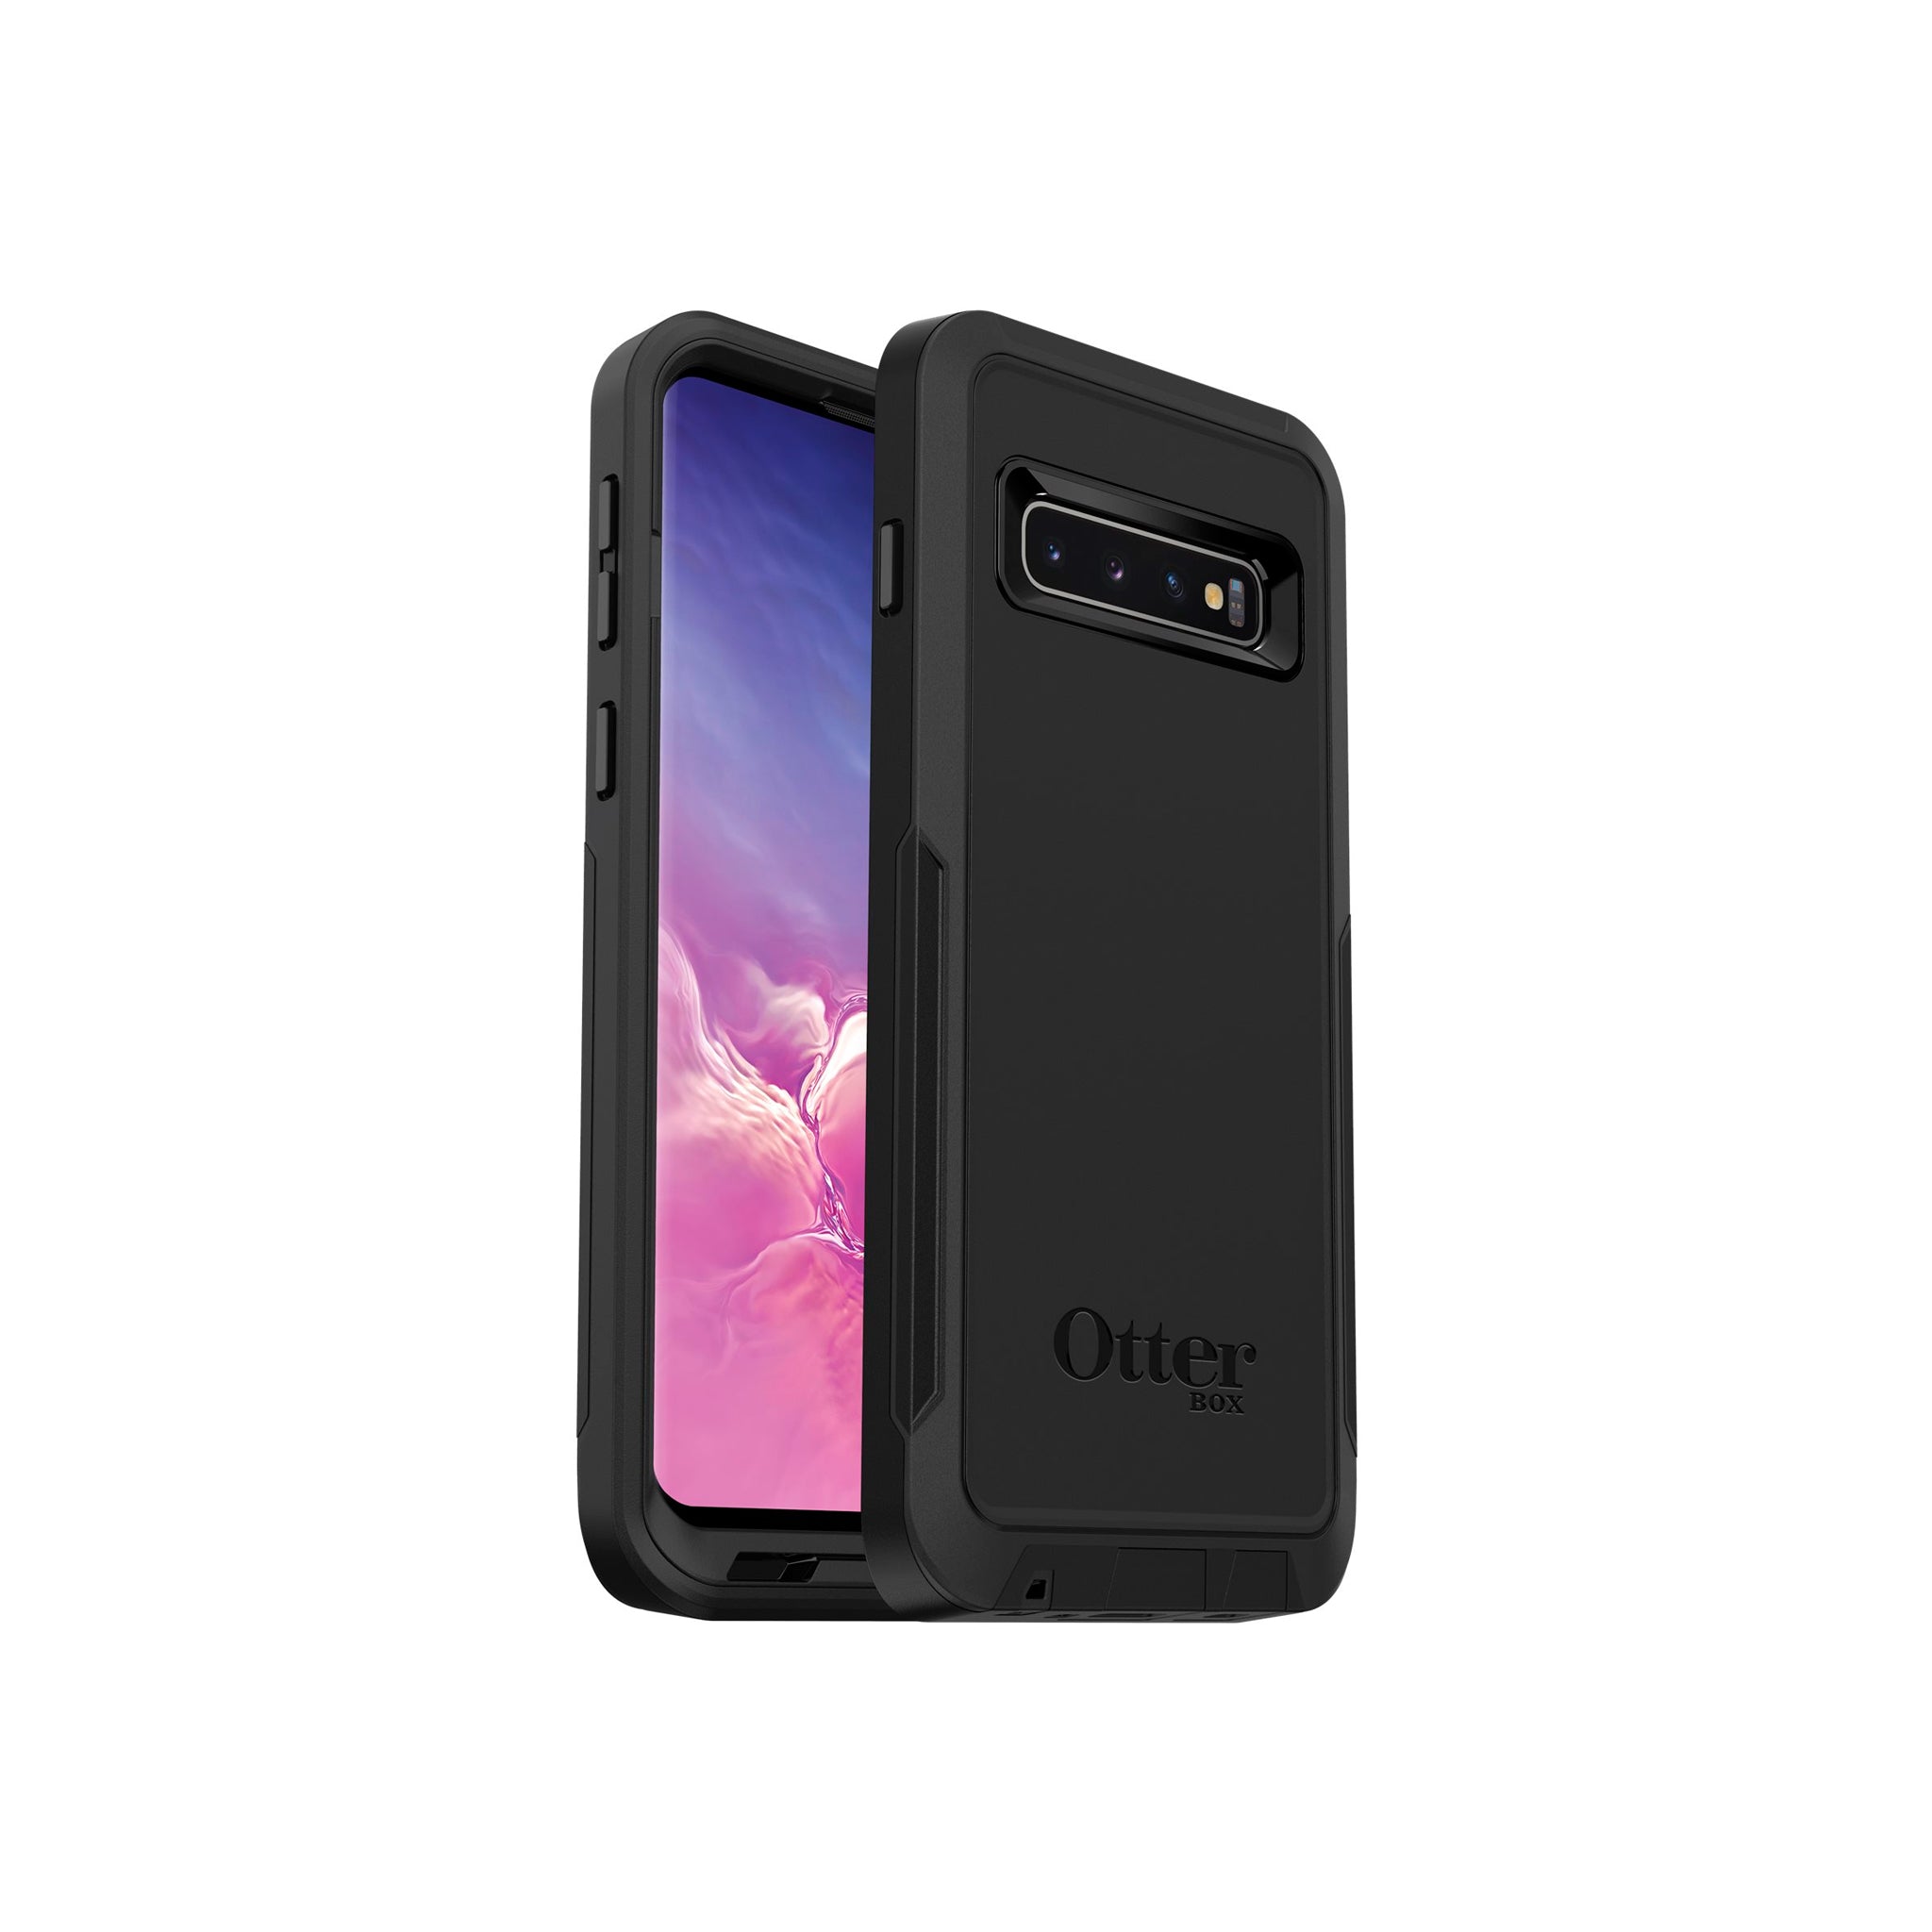 OtterBox - Pursuit Series for Galaxy S10 - Black